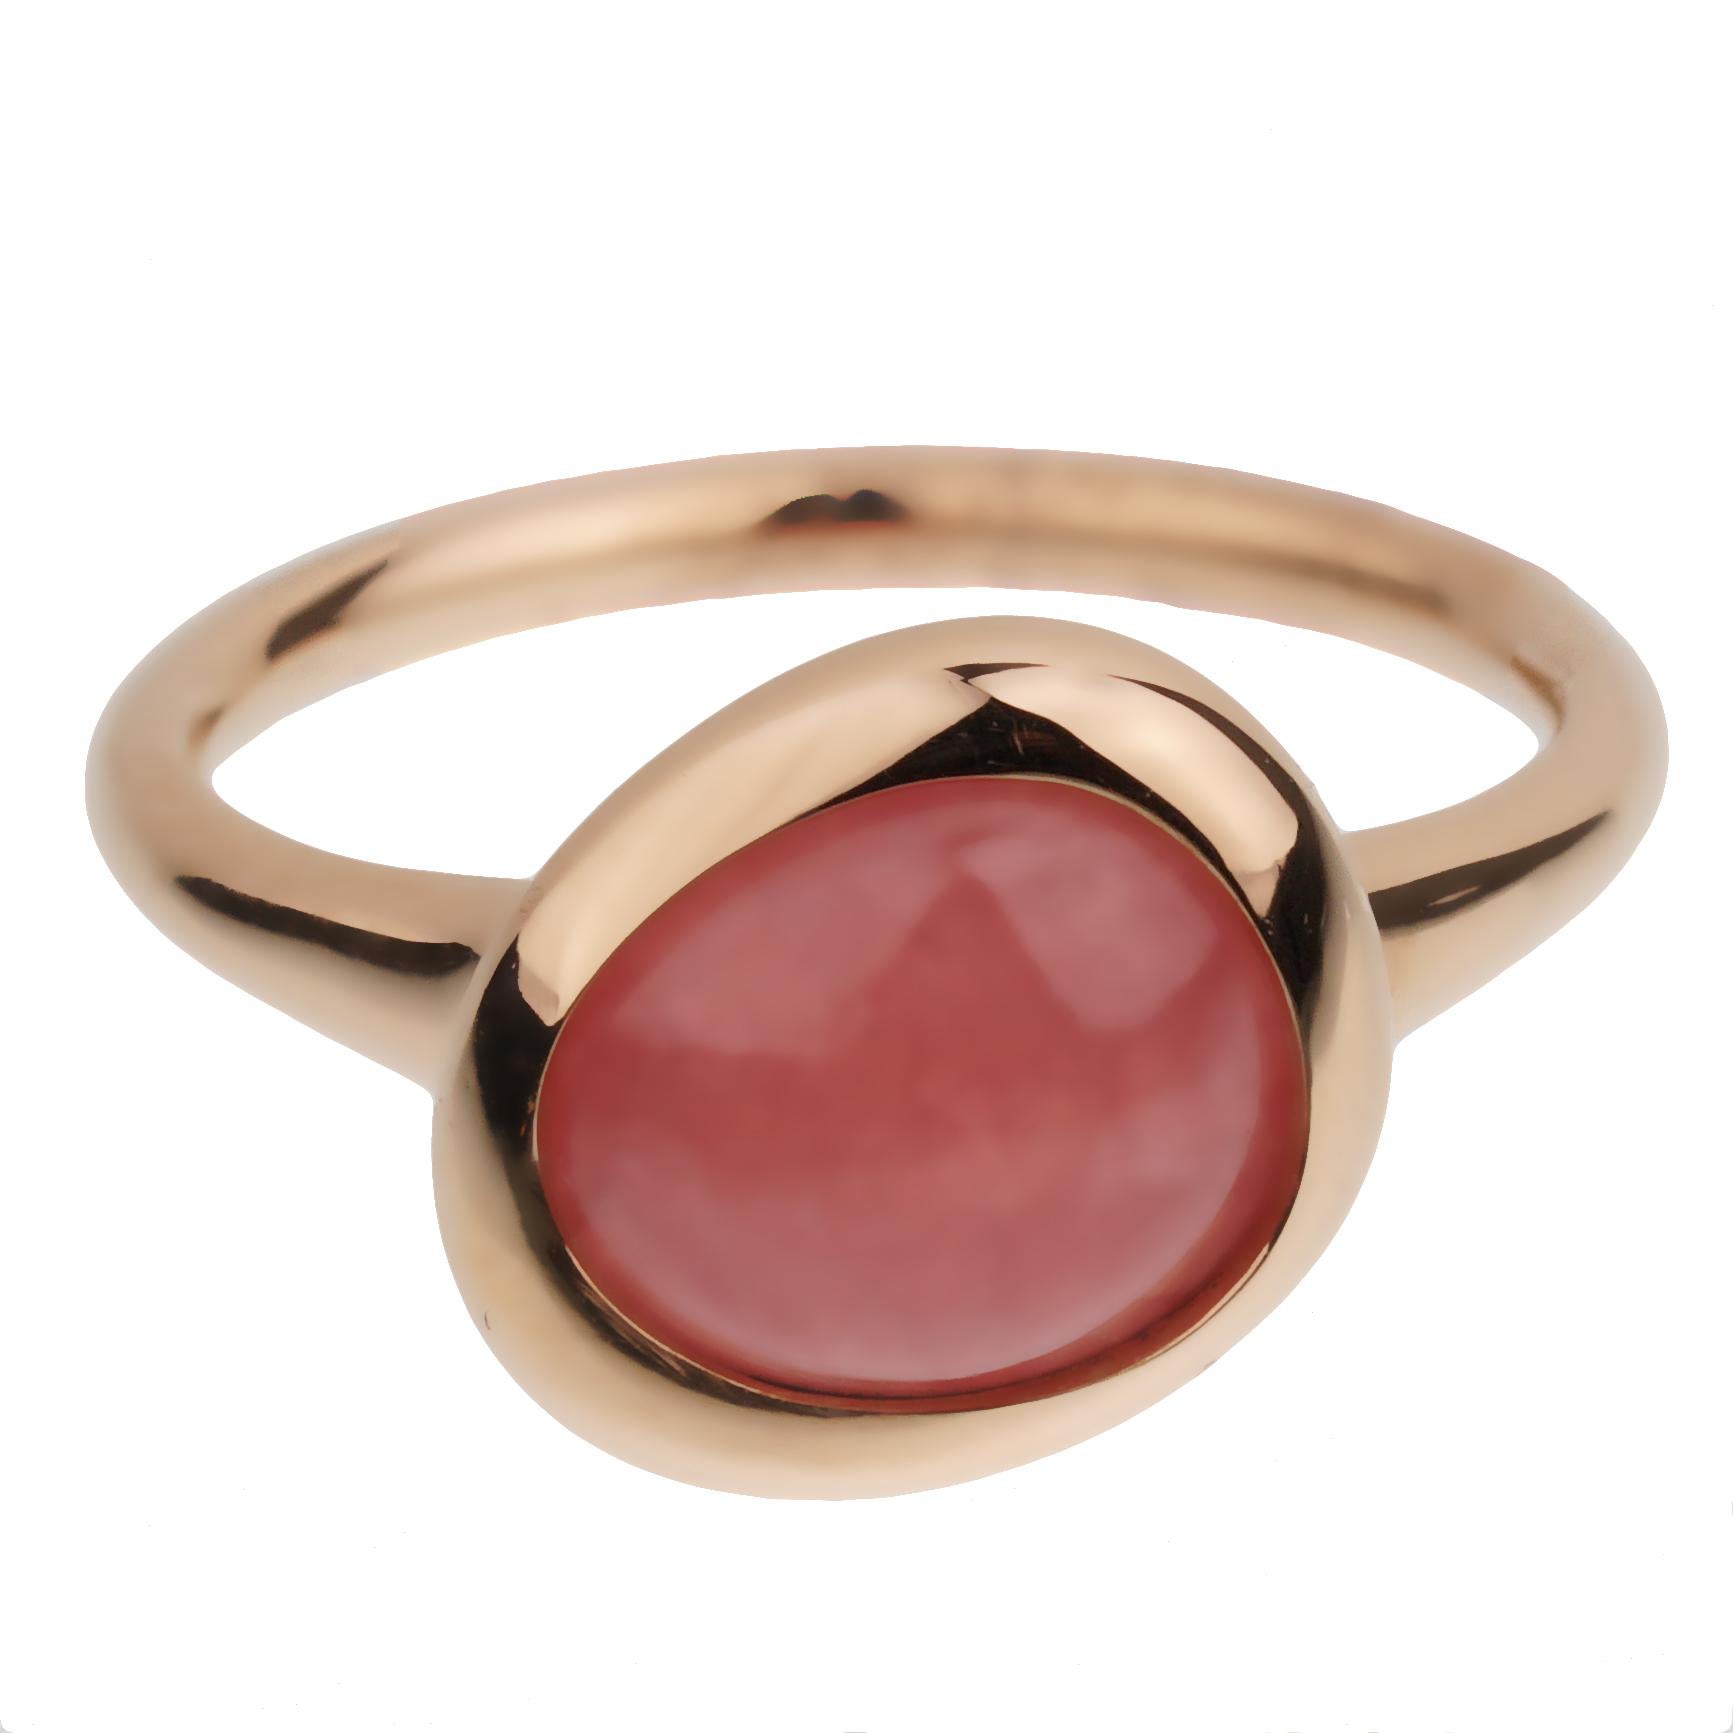 A chic Fred of Paris rose gold cocktail ring showcasing a 3ct cabochon Pink Quartz set in 18k gold. The ring measures a size 5 and can be resized if needed.